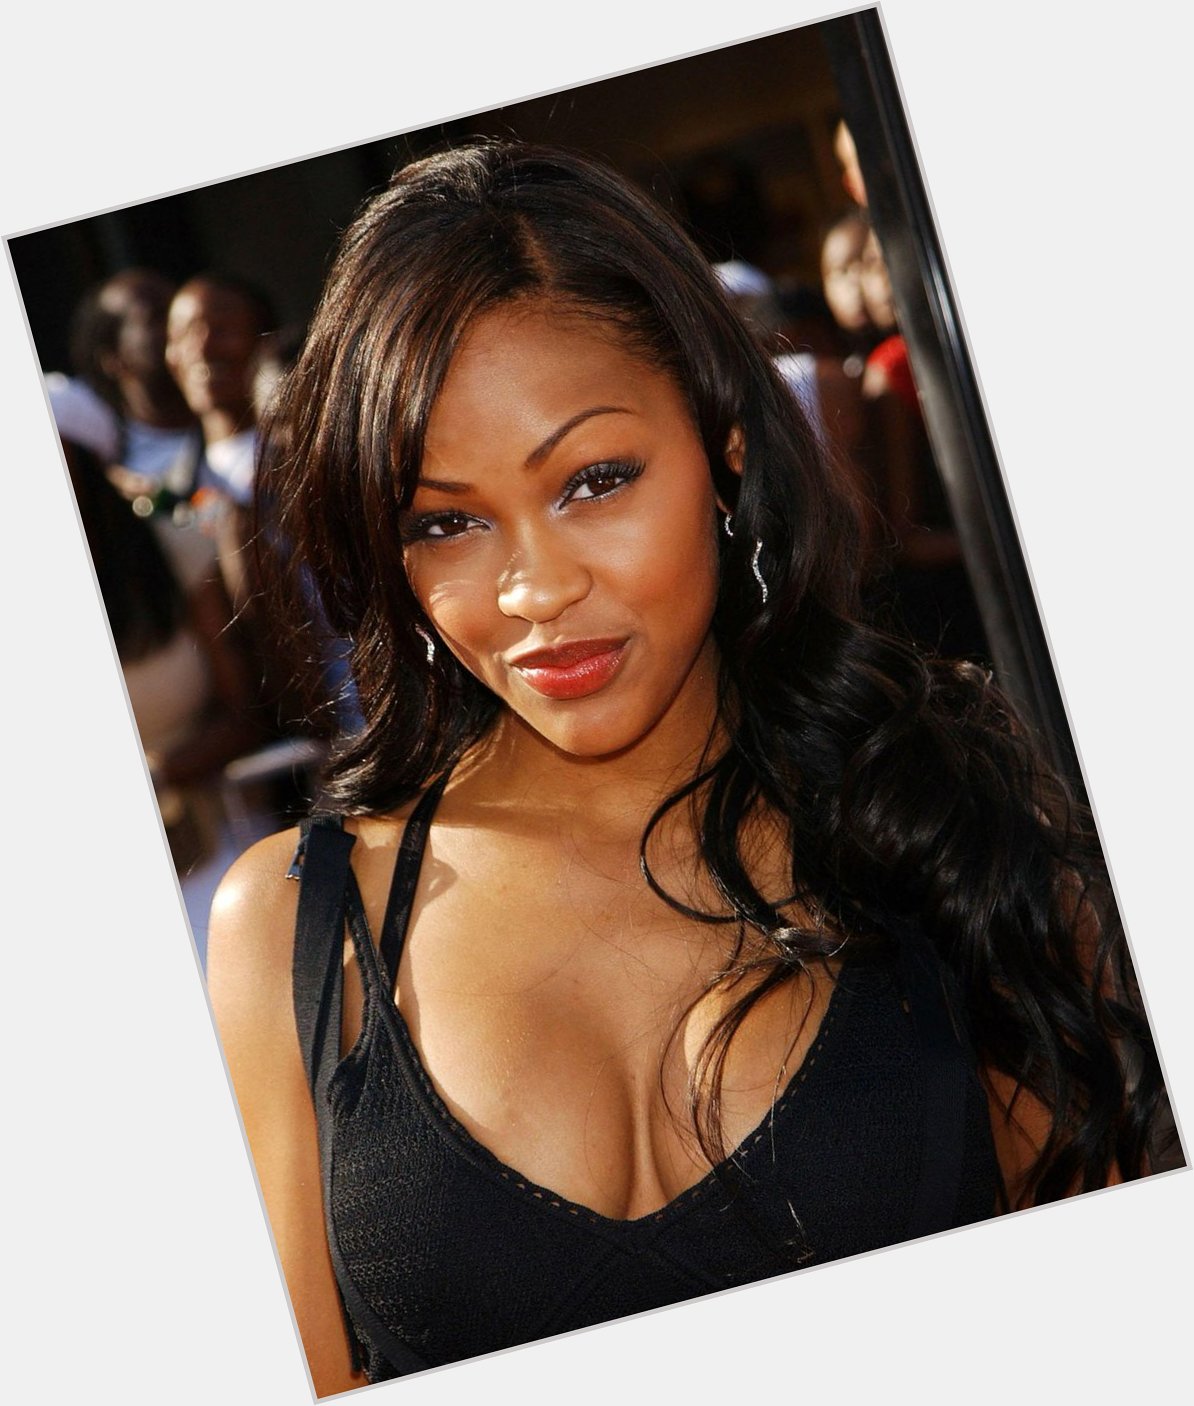 Happy Birthday to Meagan Good who turns 36 today! 